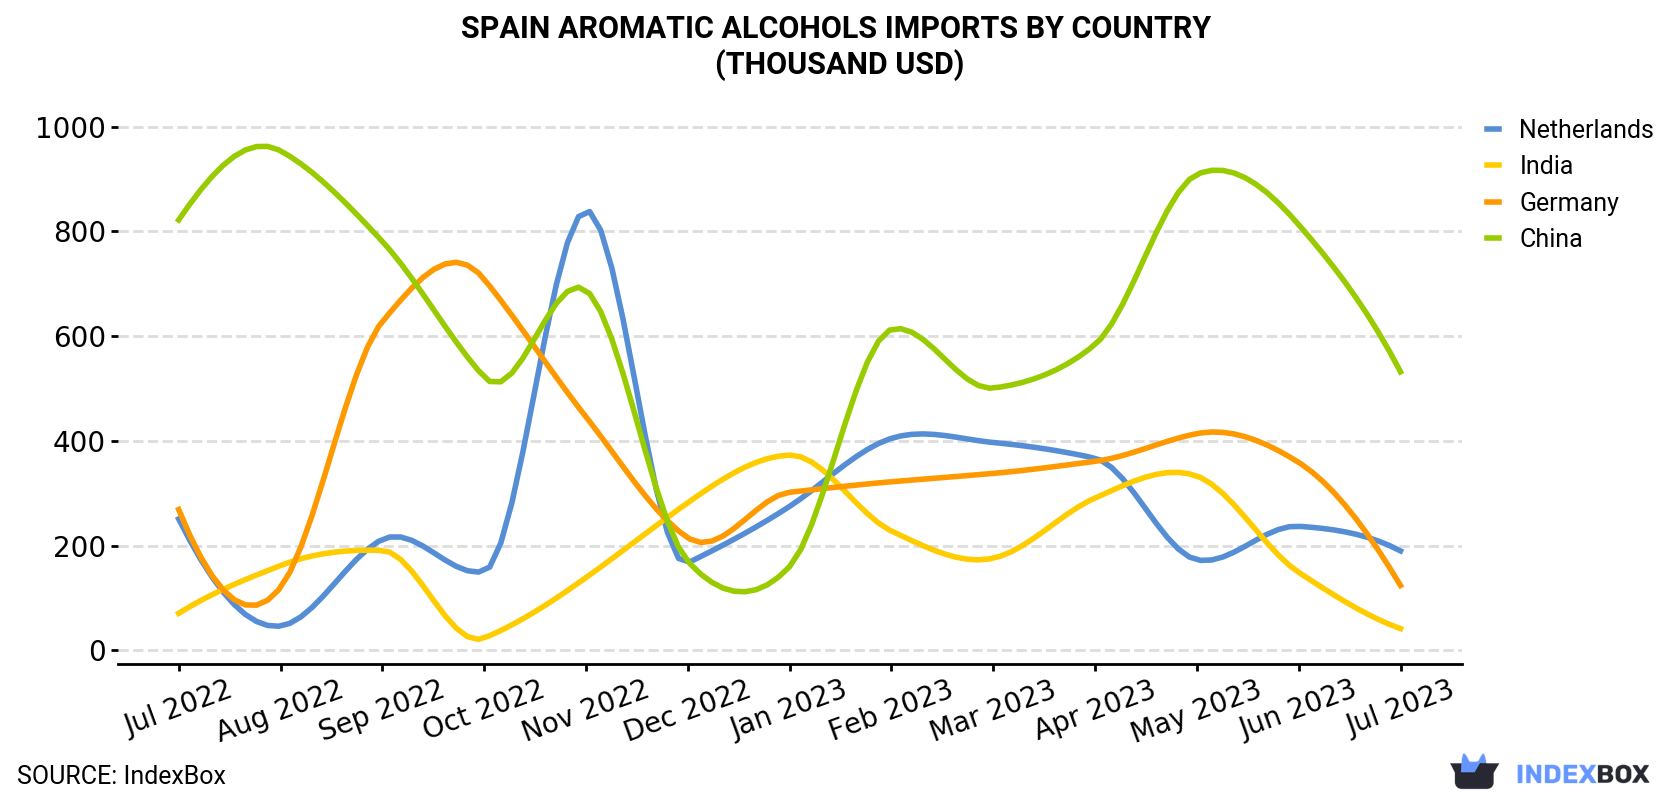 Spain Aromatic Alcohols Imports By Country (Thousand USD)